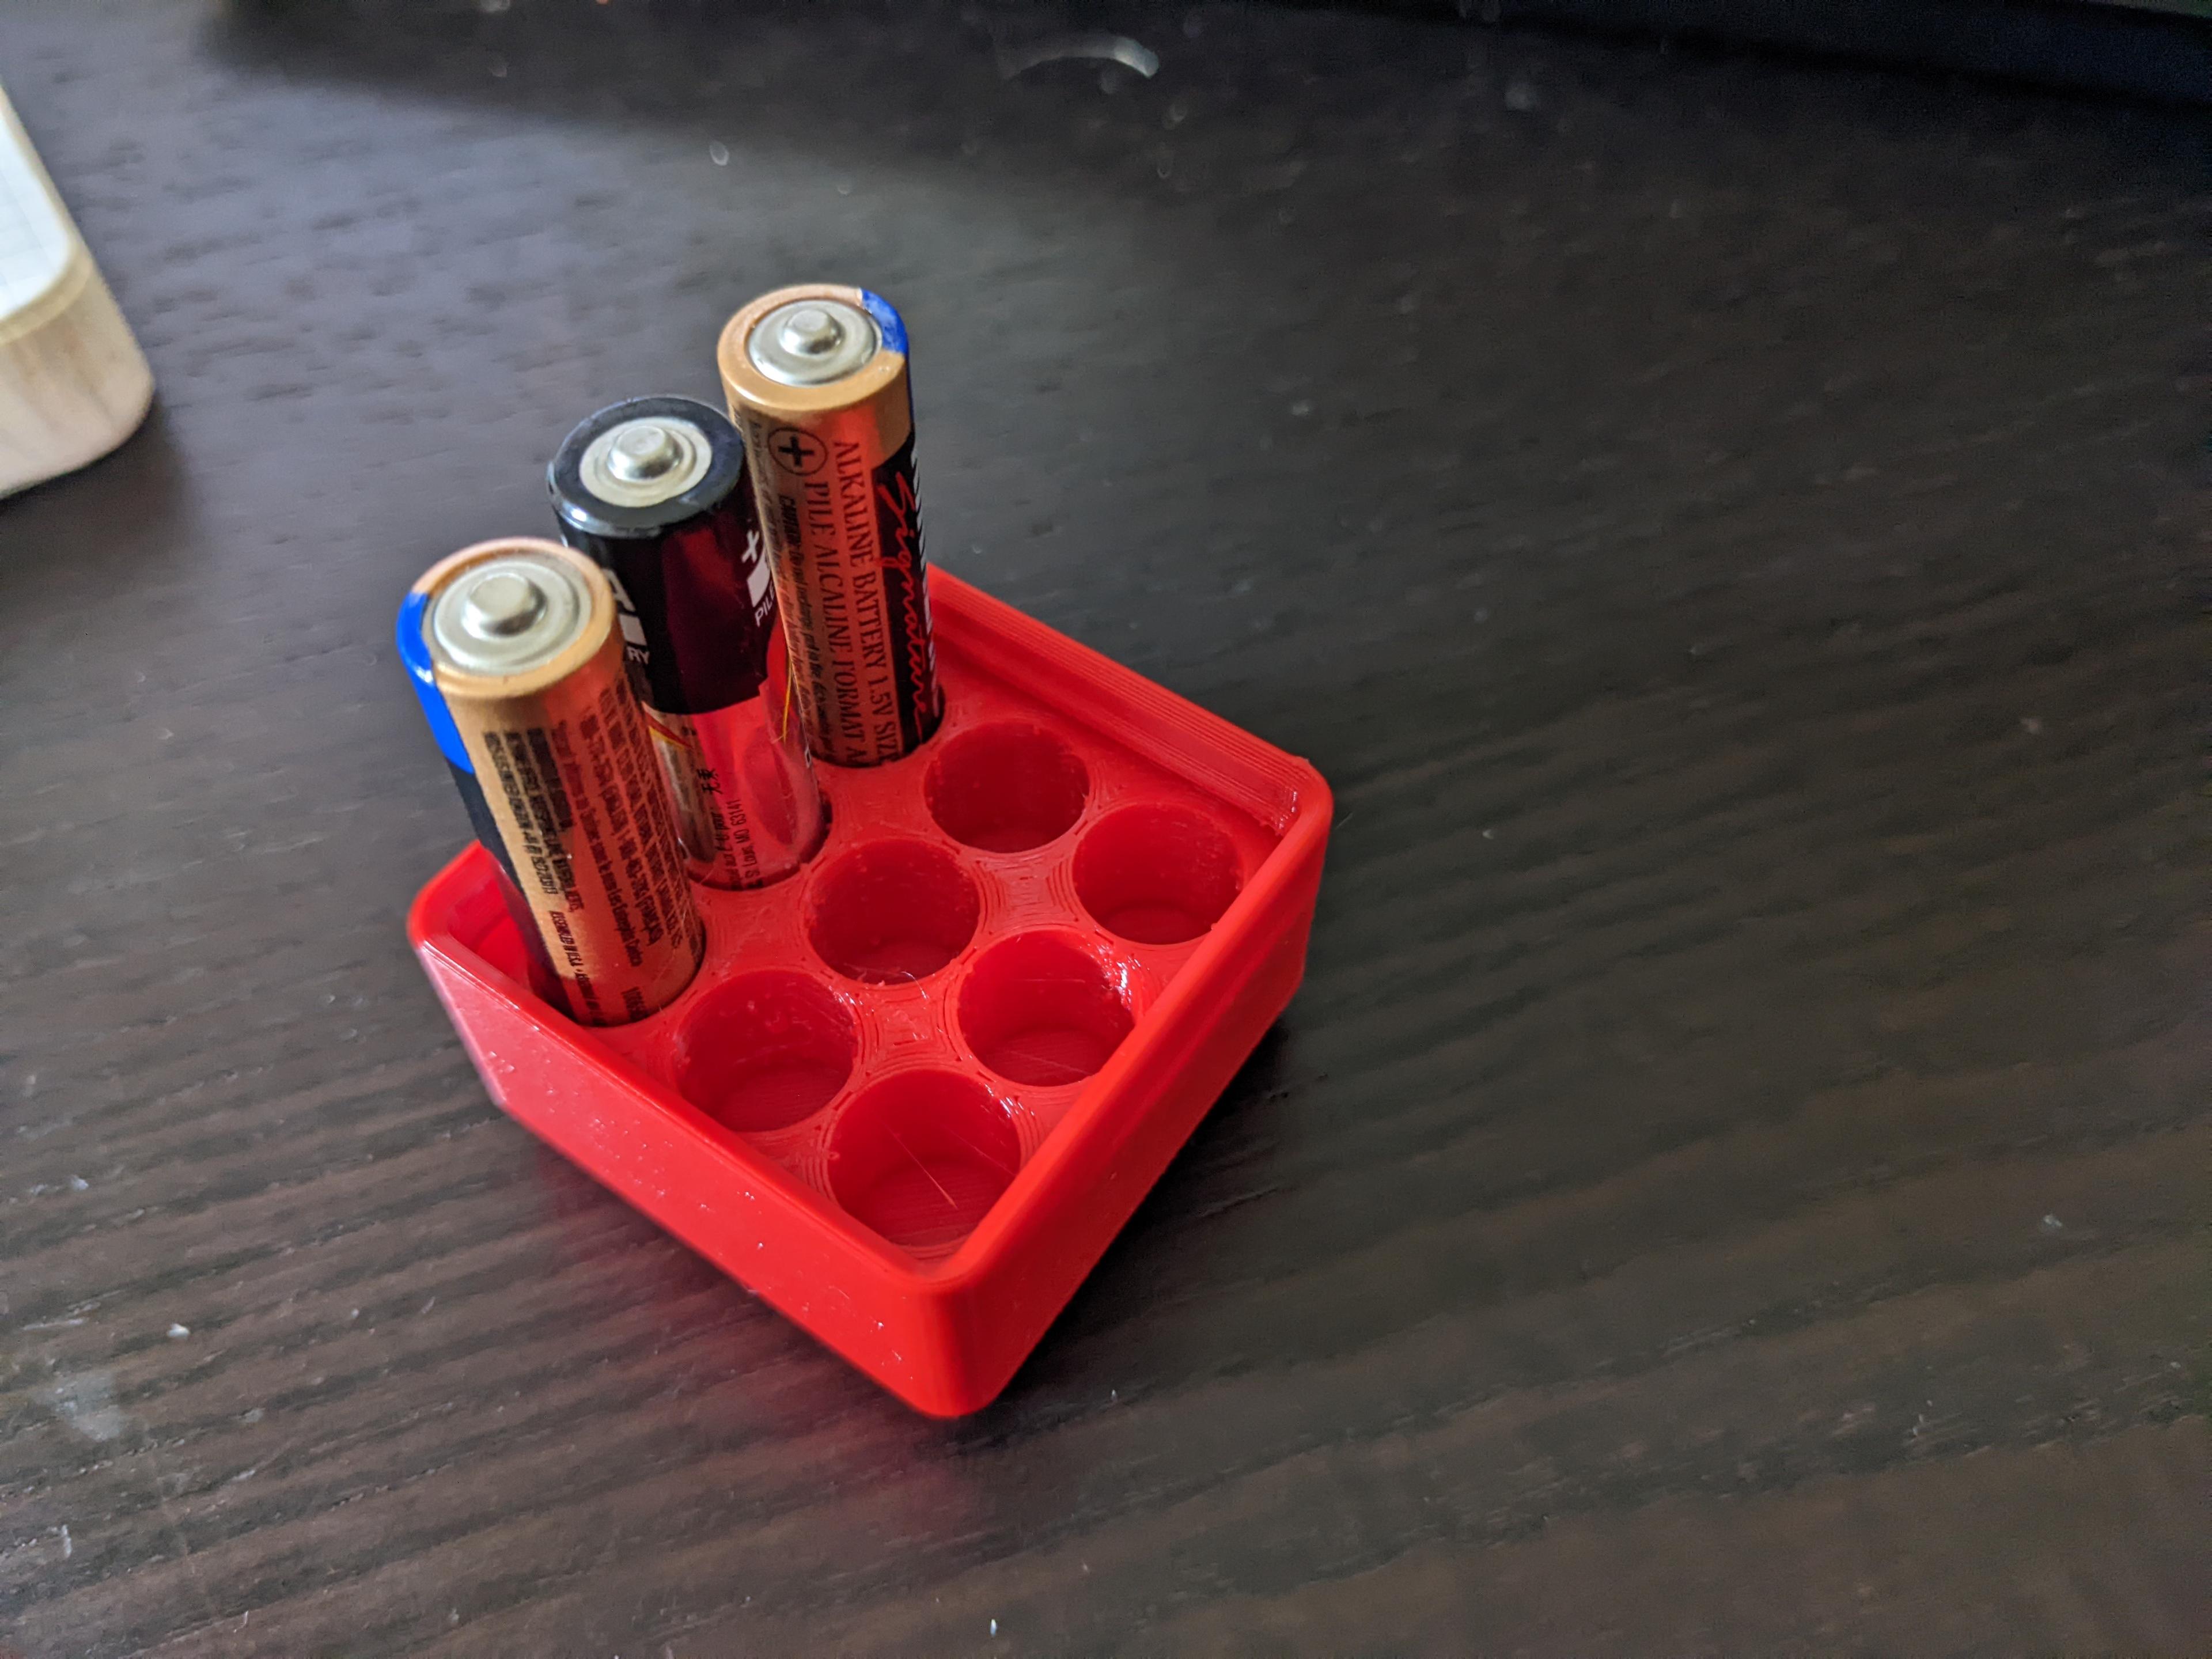 Gridfinity compatible 1x1 9xAAA battery holder.stl 3d model